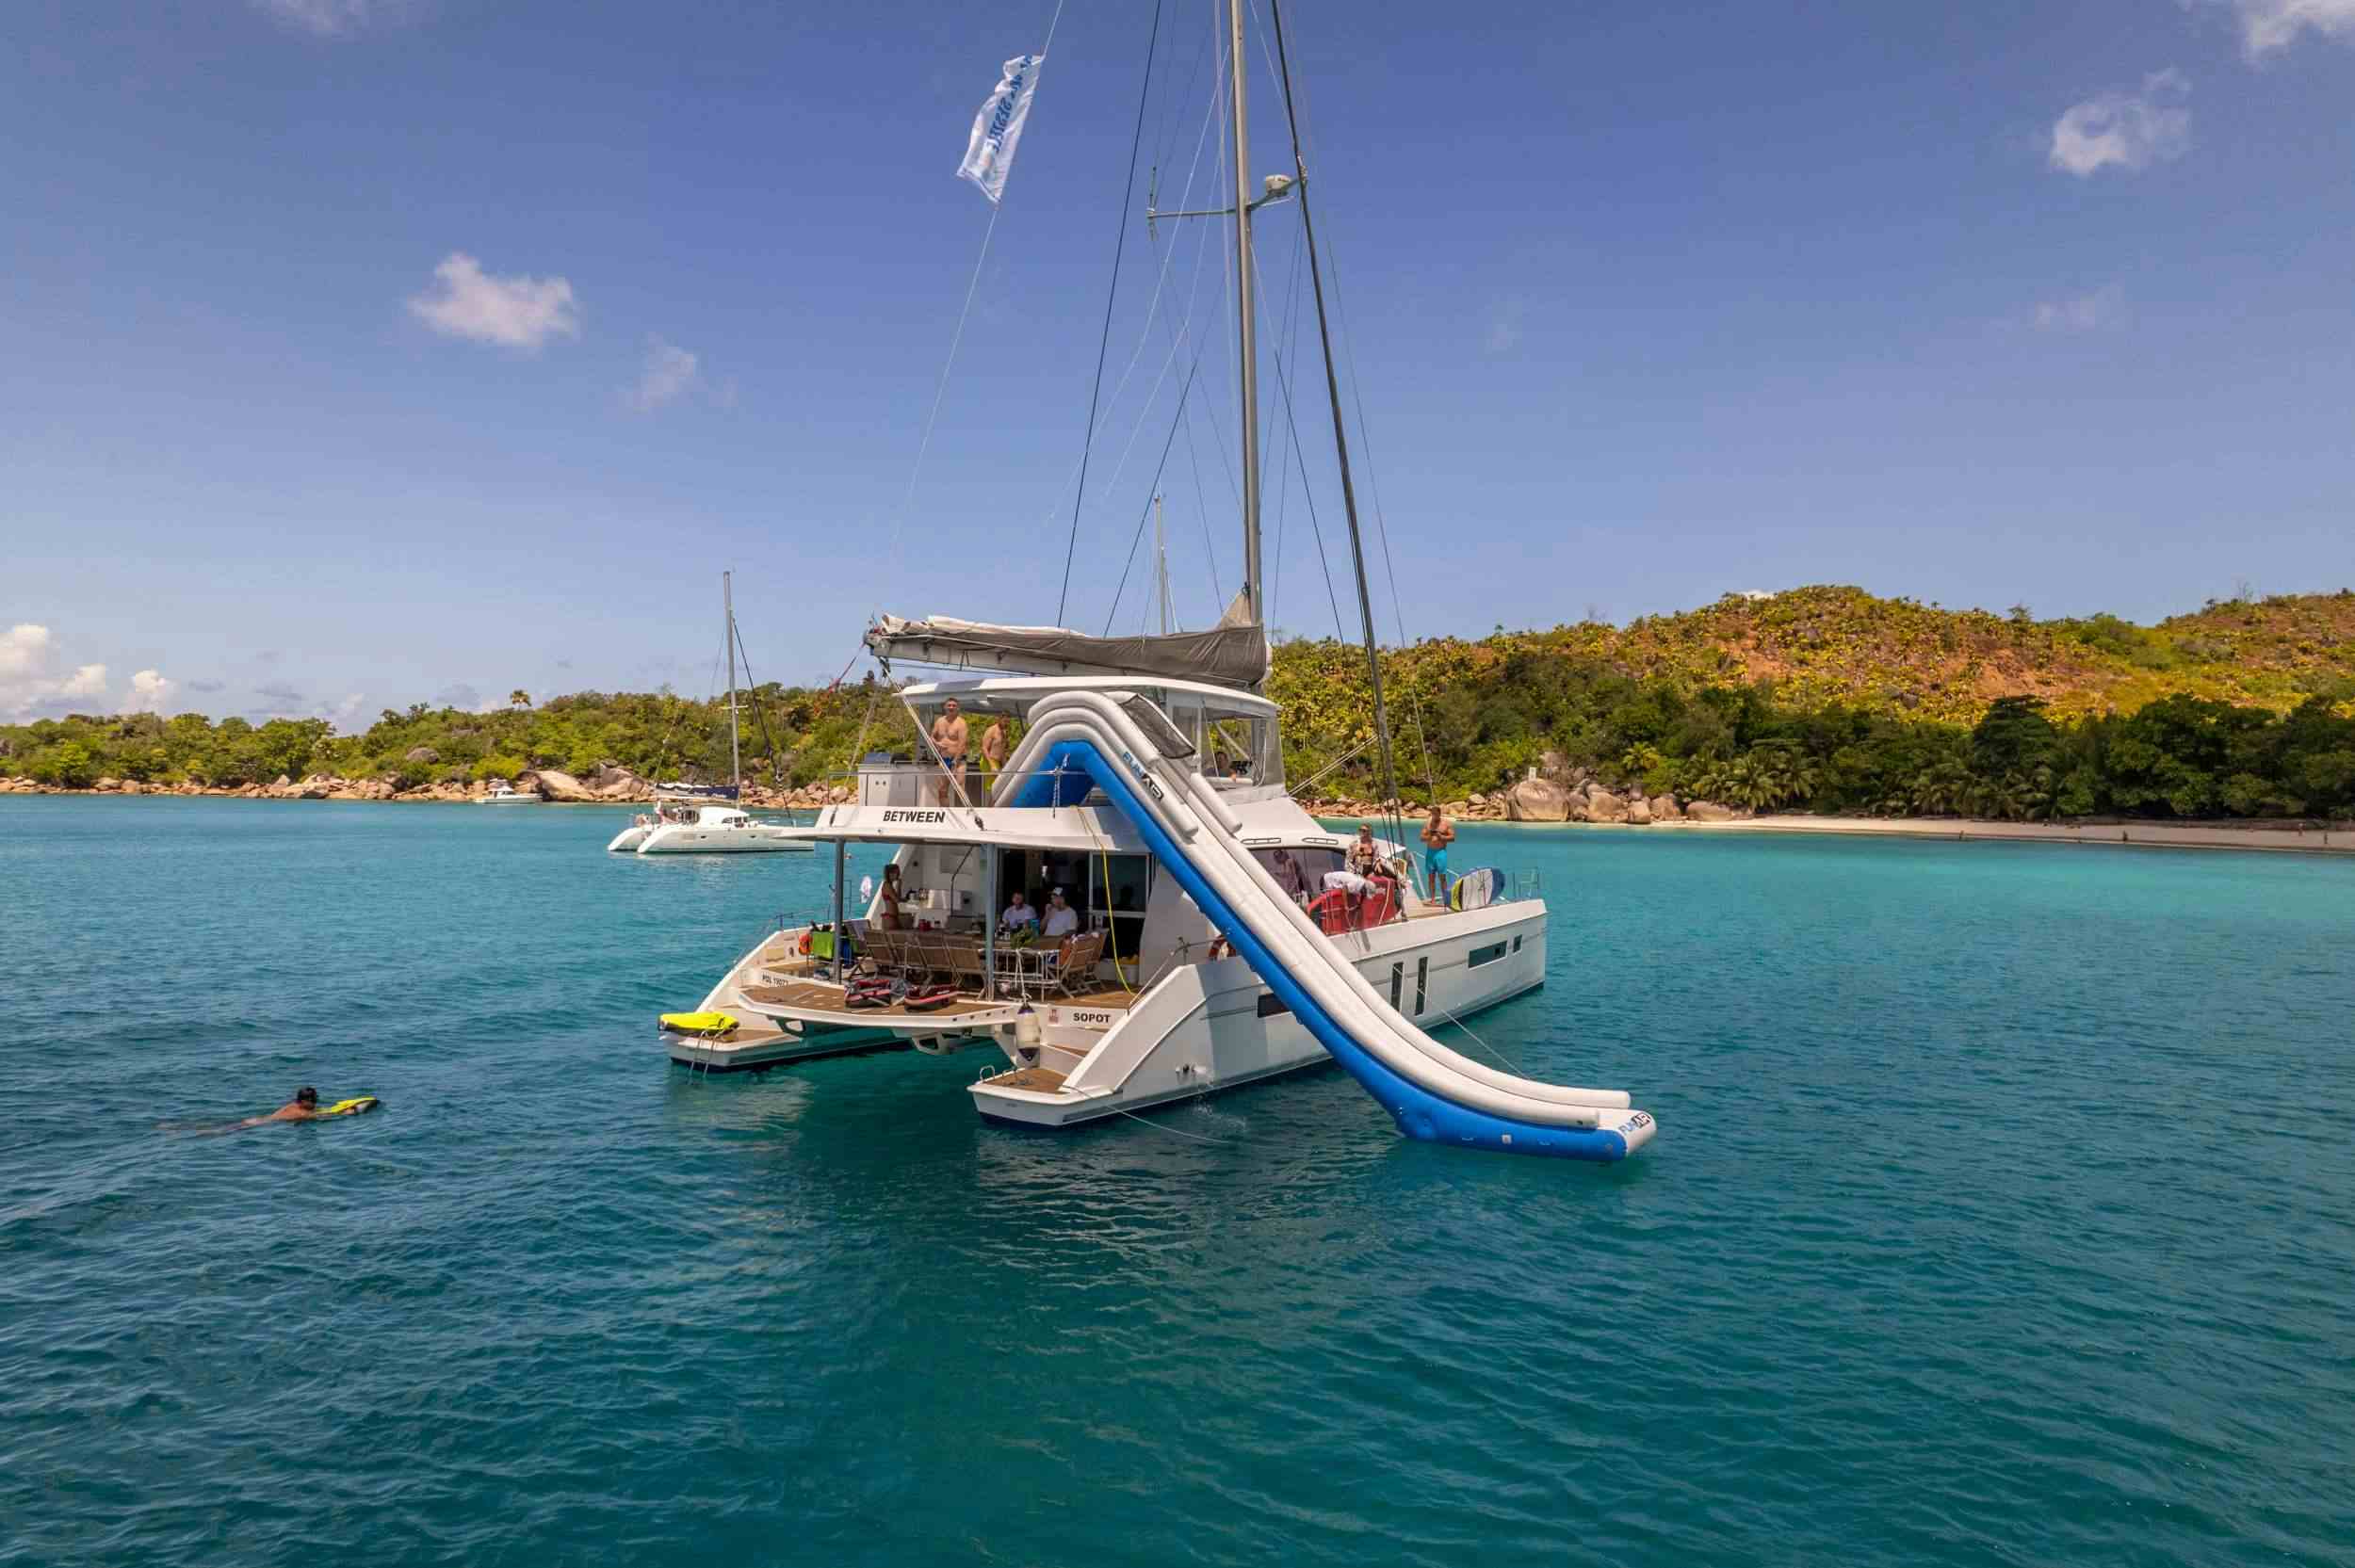 BETWEEN - Yacht Charter Seychelles & Boat hire in Indian Ocean & SE Asia 1